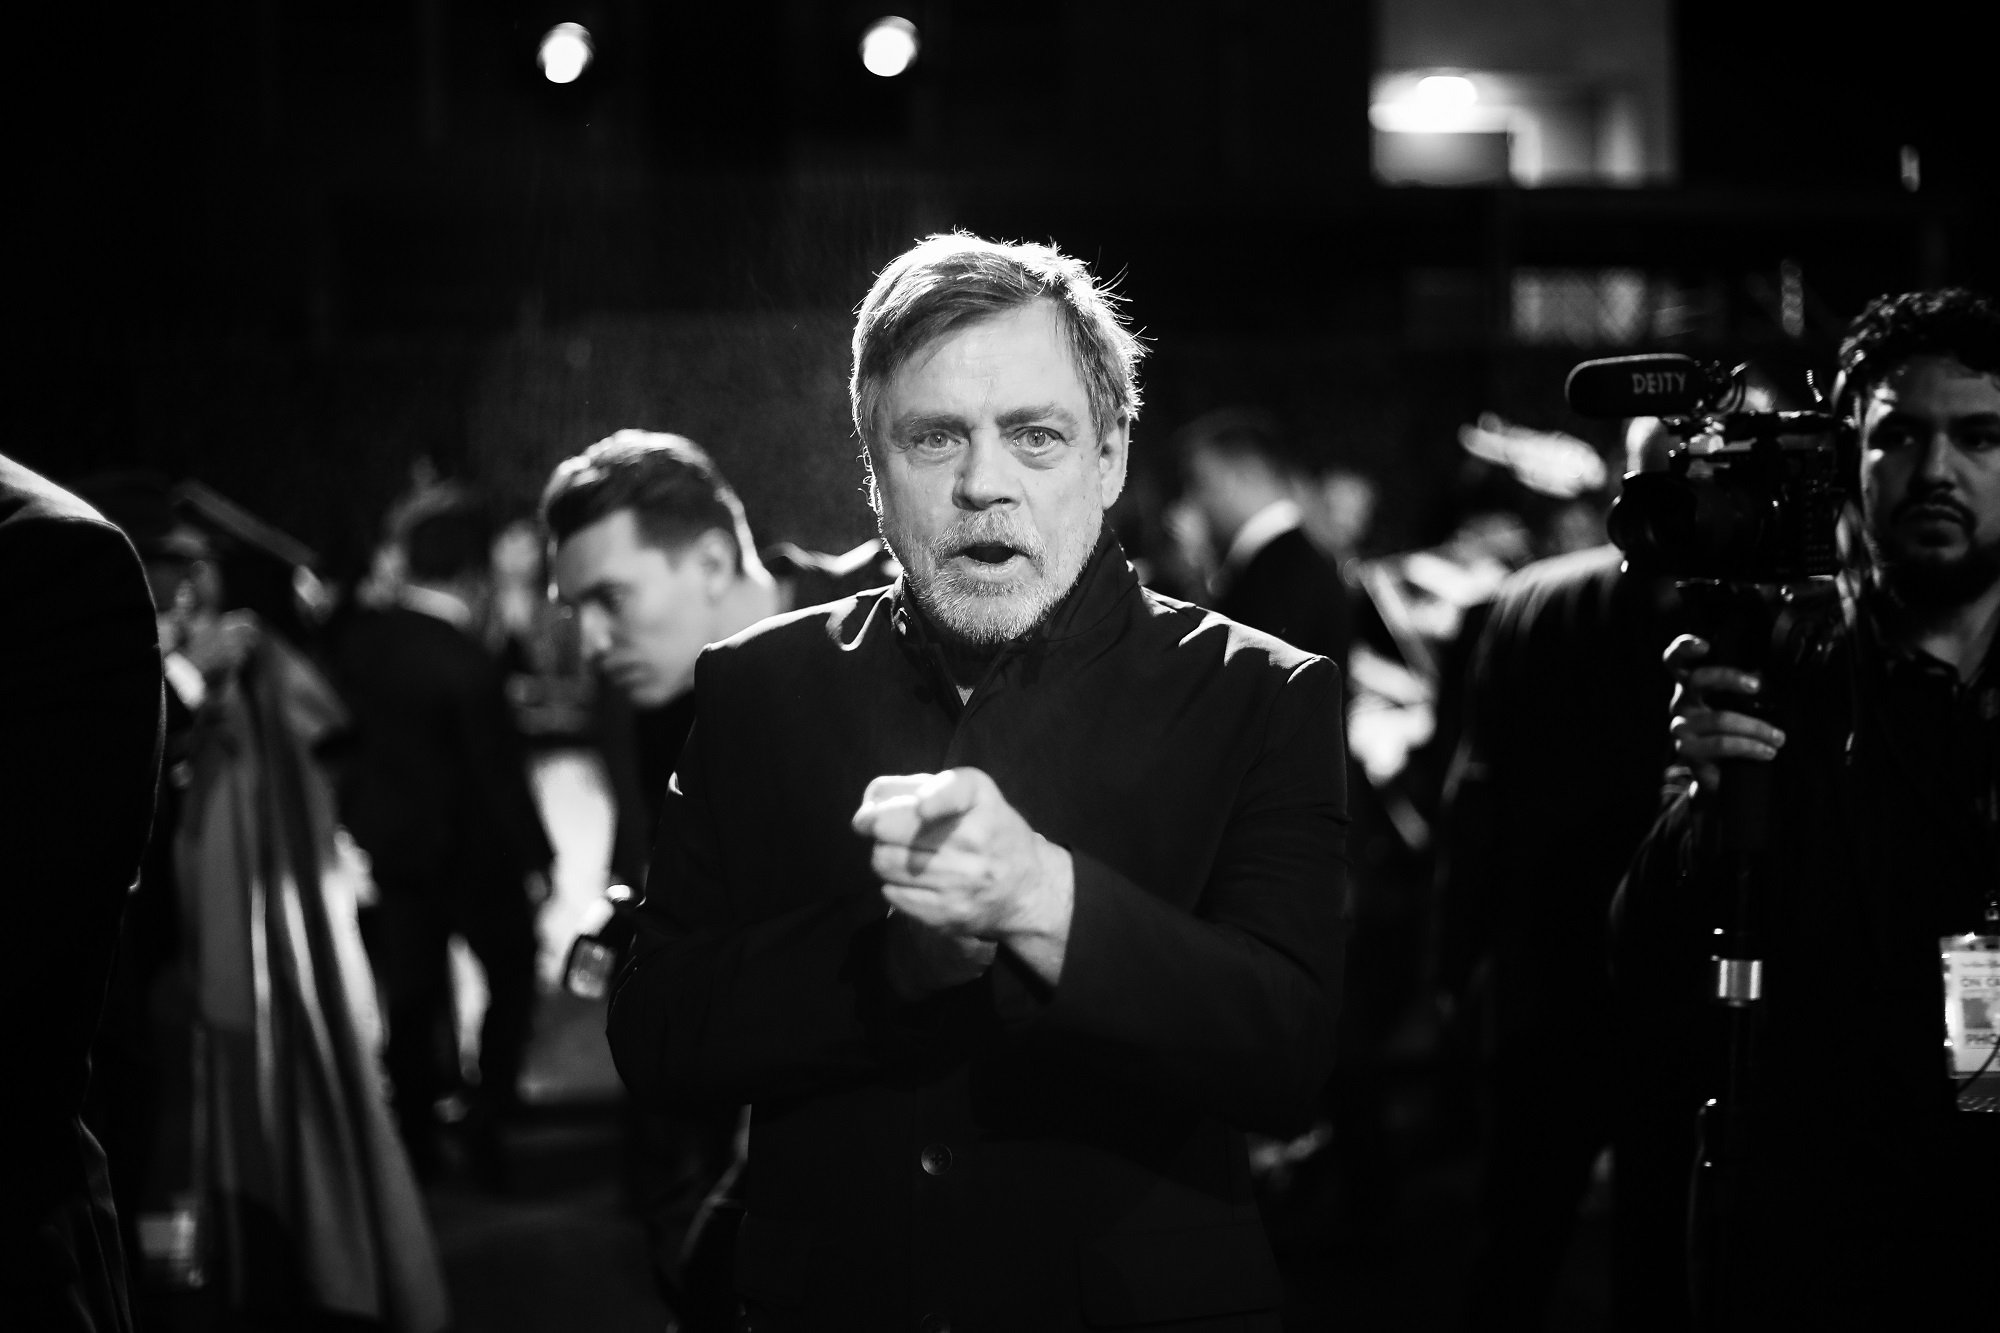 What did Mark Hamill really think of The Last Jedi?